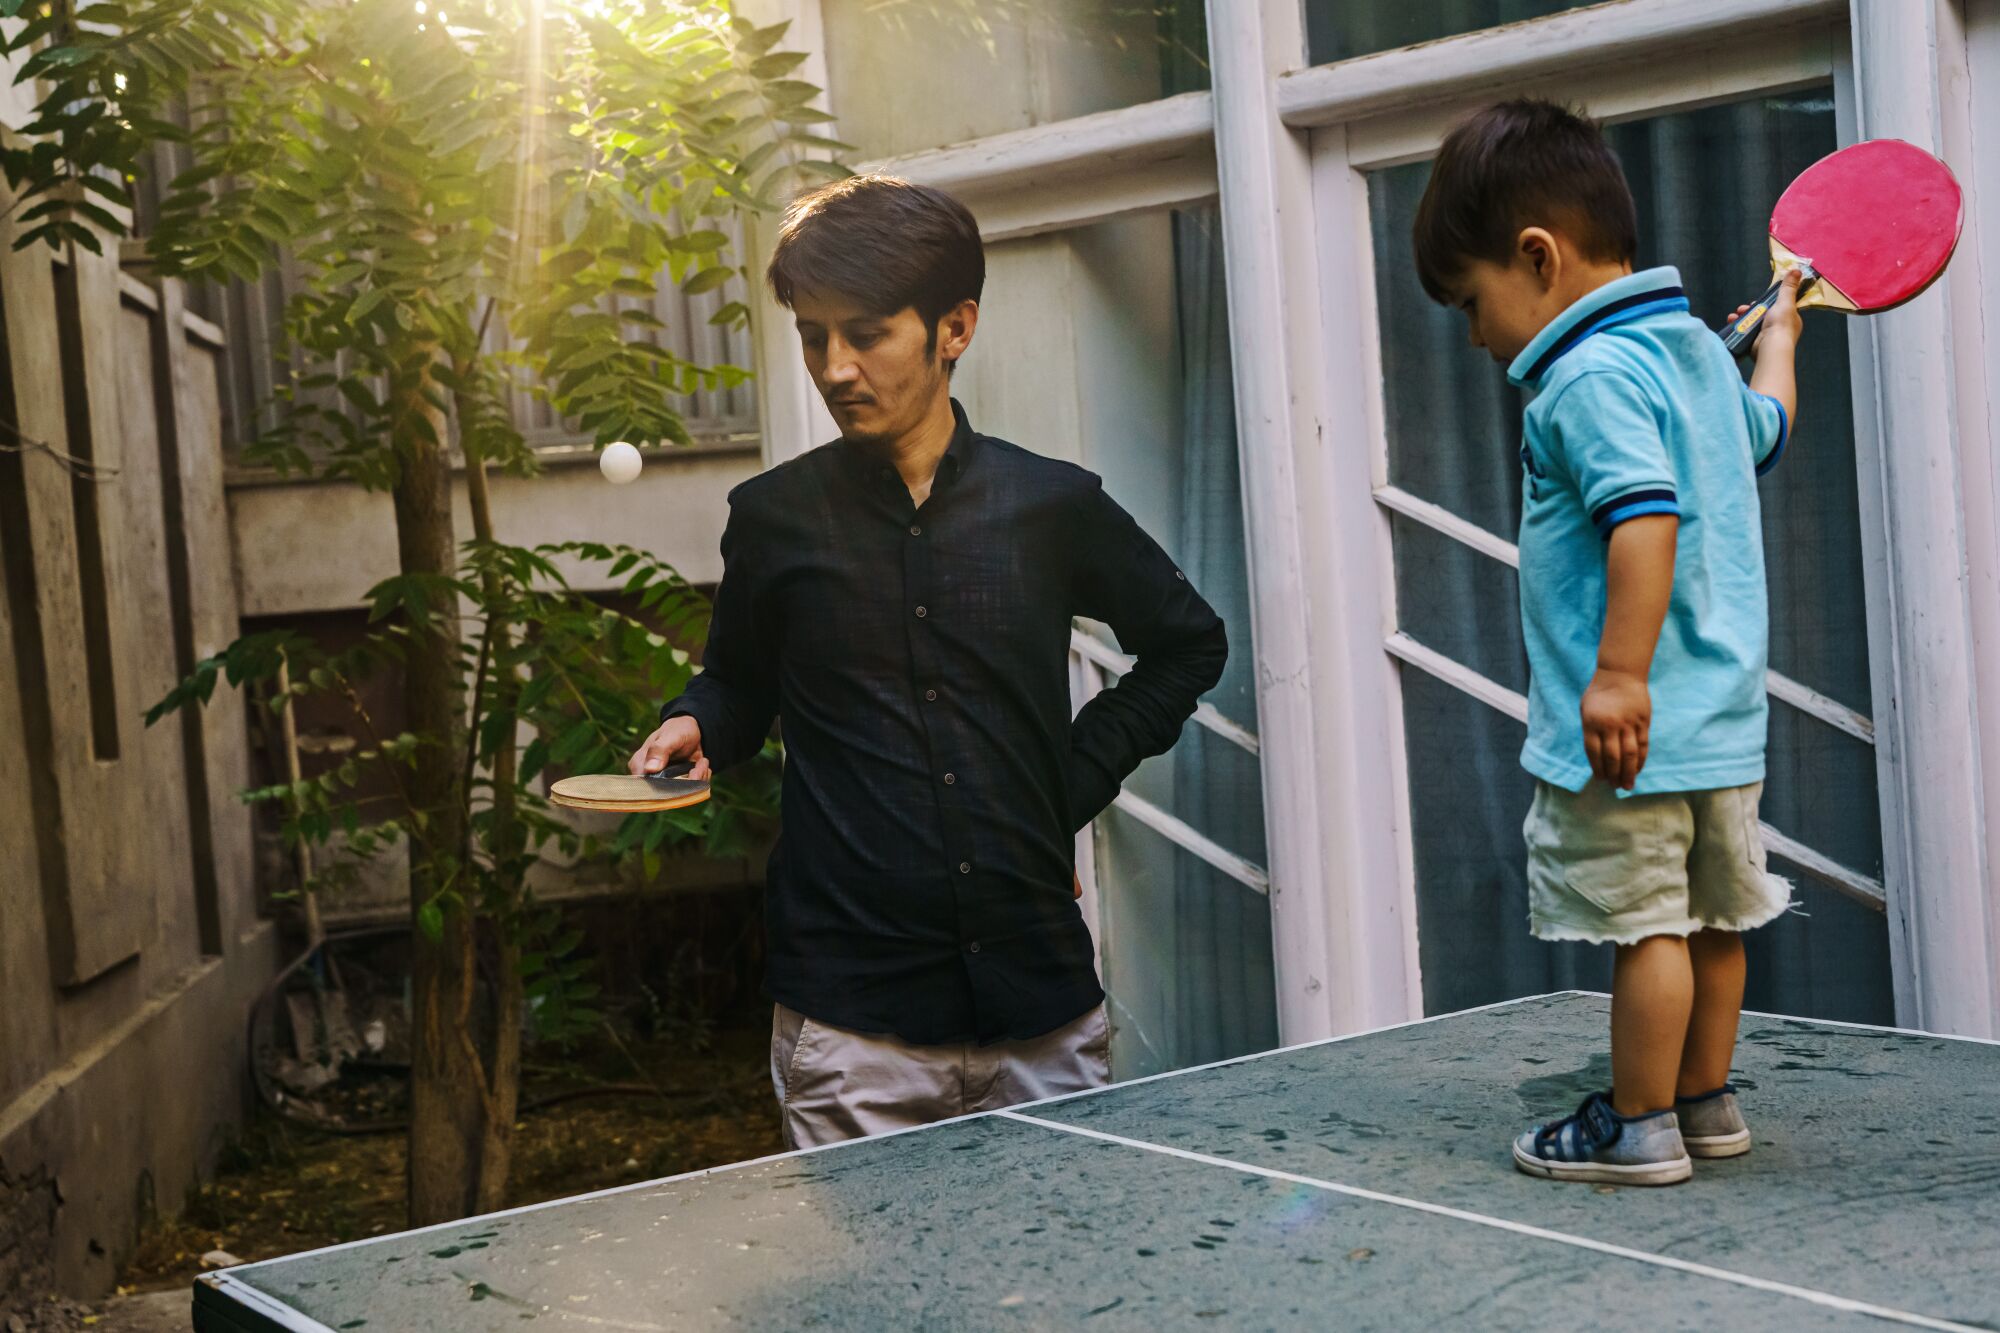 Man playing table tennis with his young son